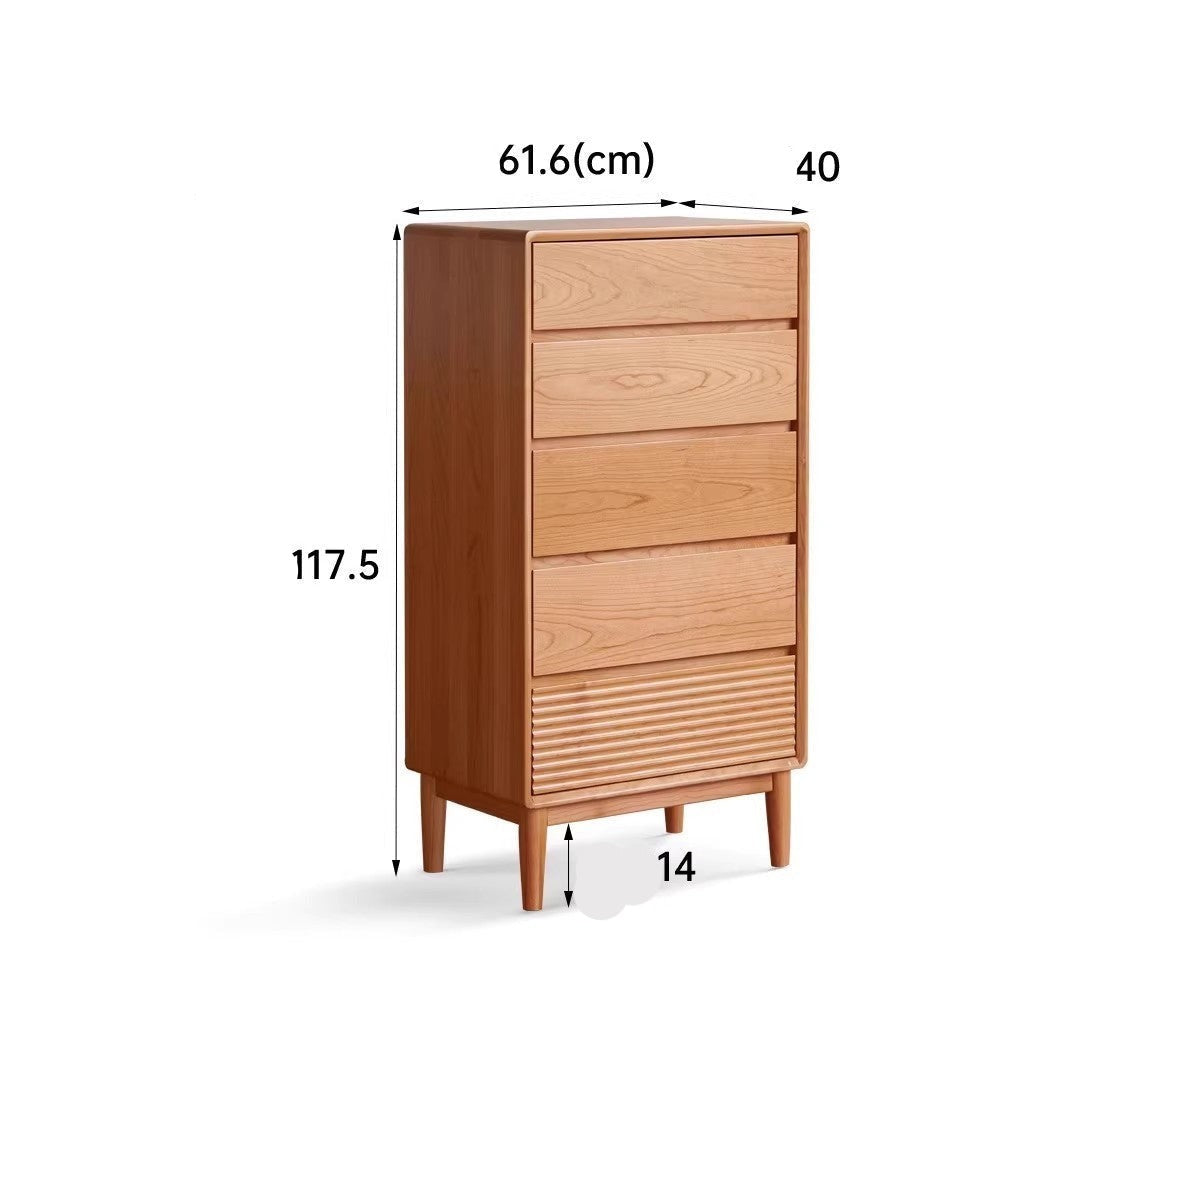 Cherry Wood Chest of Drawers, Nine Drawer Cabinet "